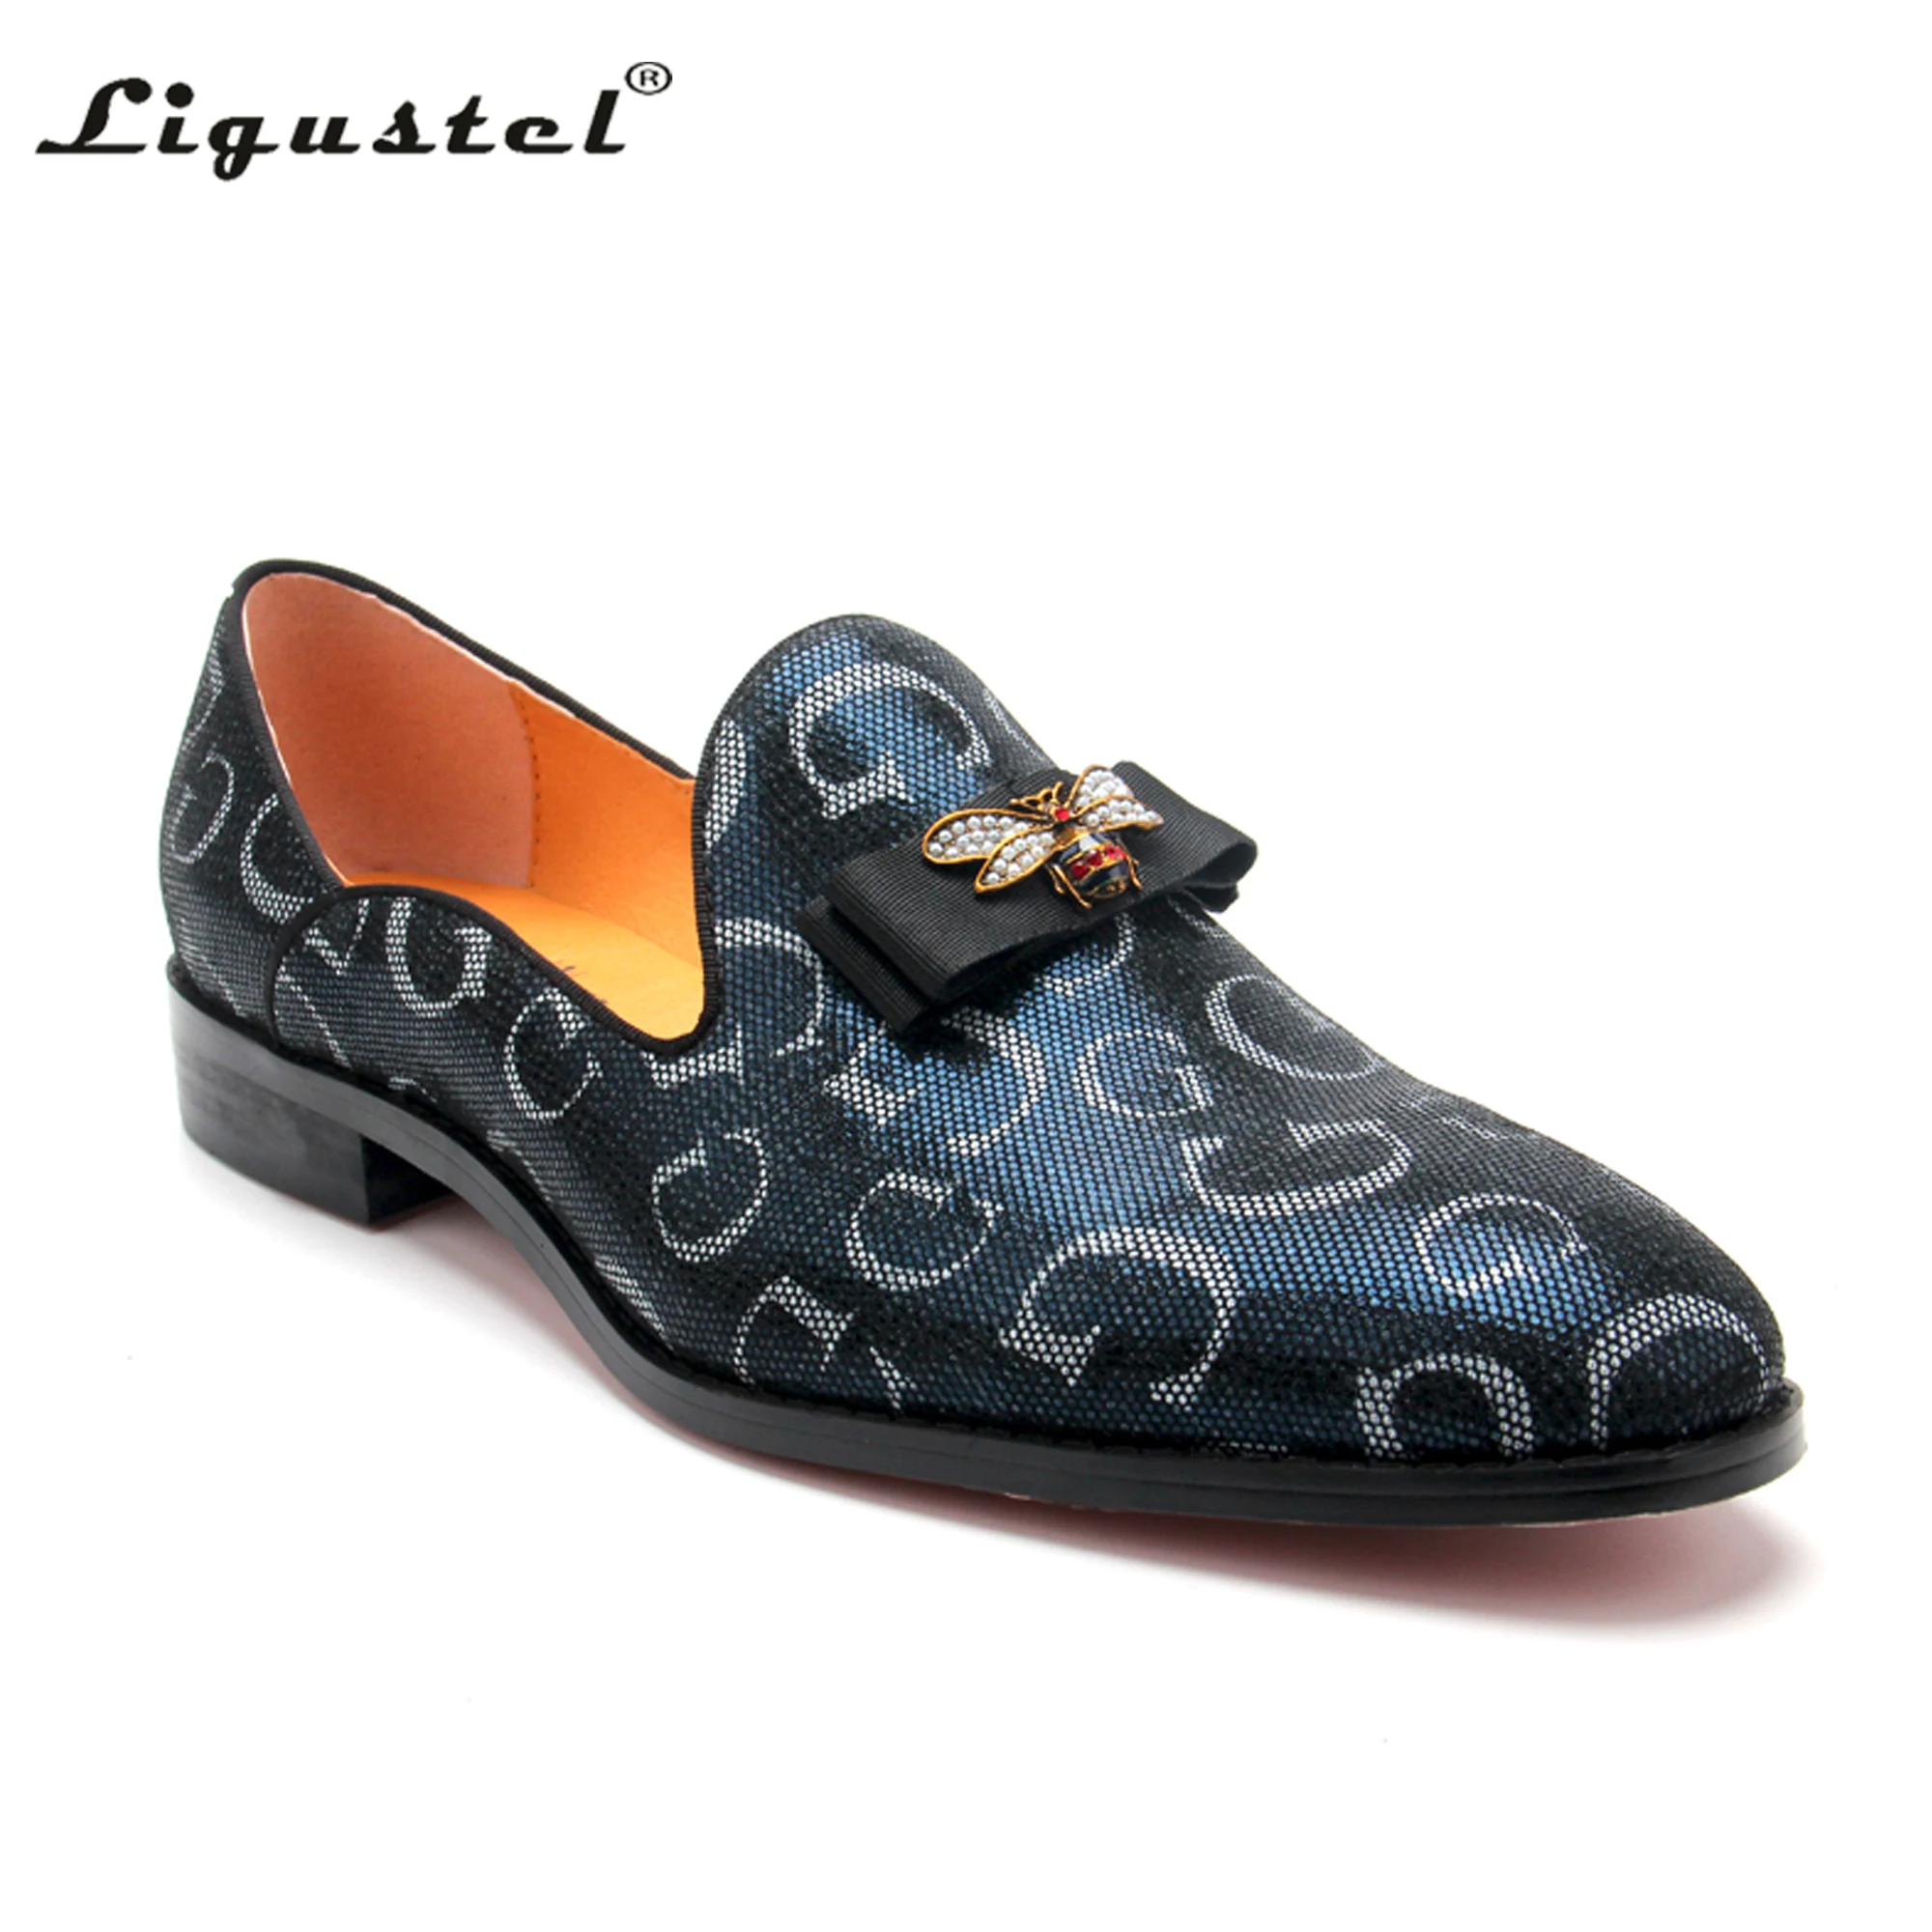 us Size 5-12 Genuine Leather Mens Slip On Wedding Prom Dress Loafers Shoes 